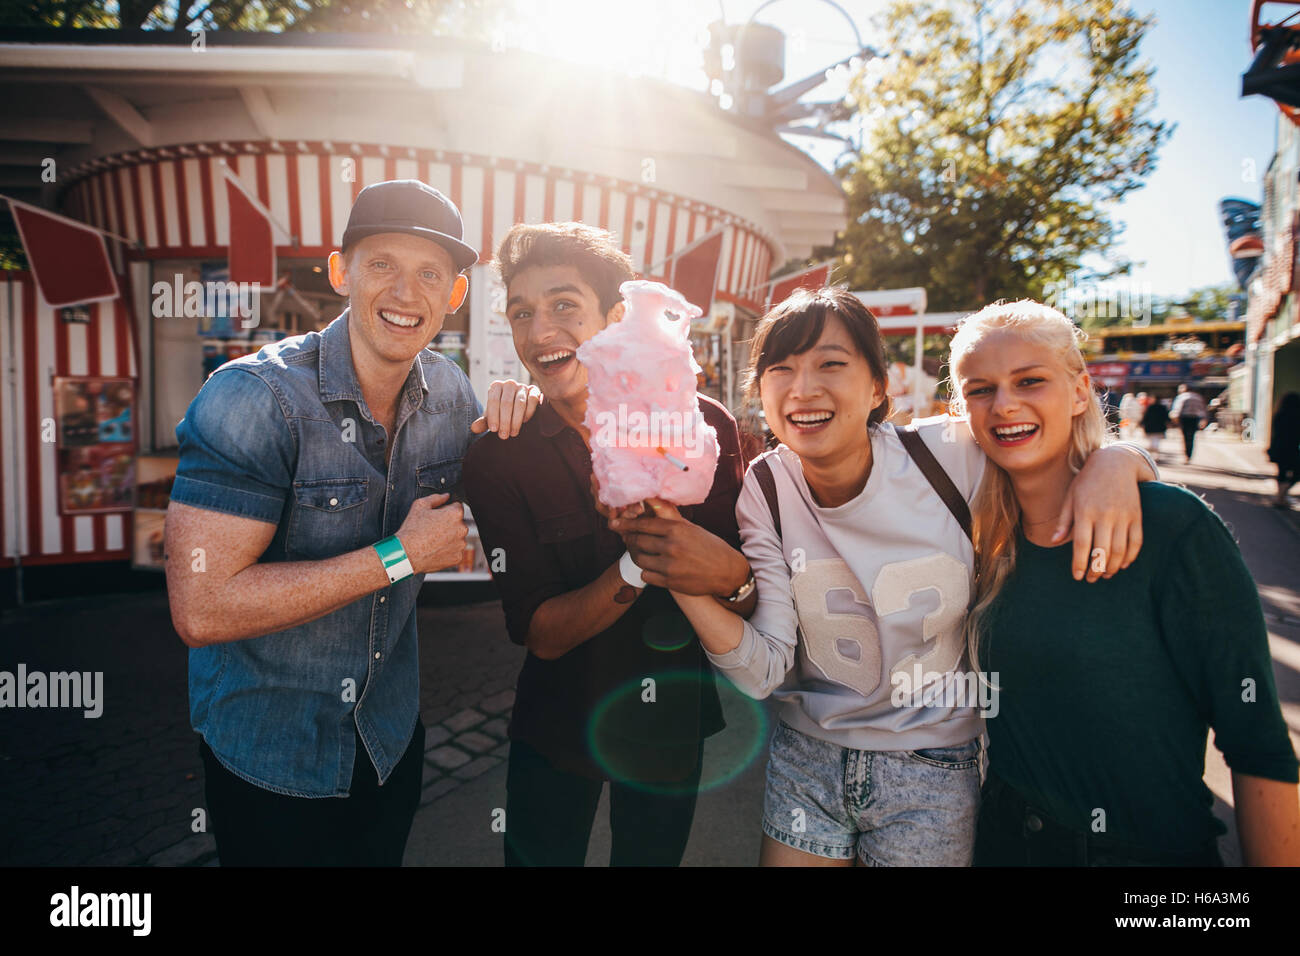 Group of happy young friends with cotton candy in amusement park. Young men and women holding cotton candyfloss and smiling. Stock Photo